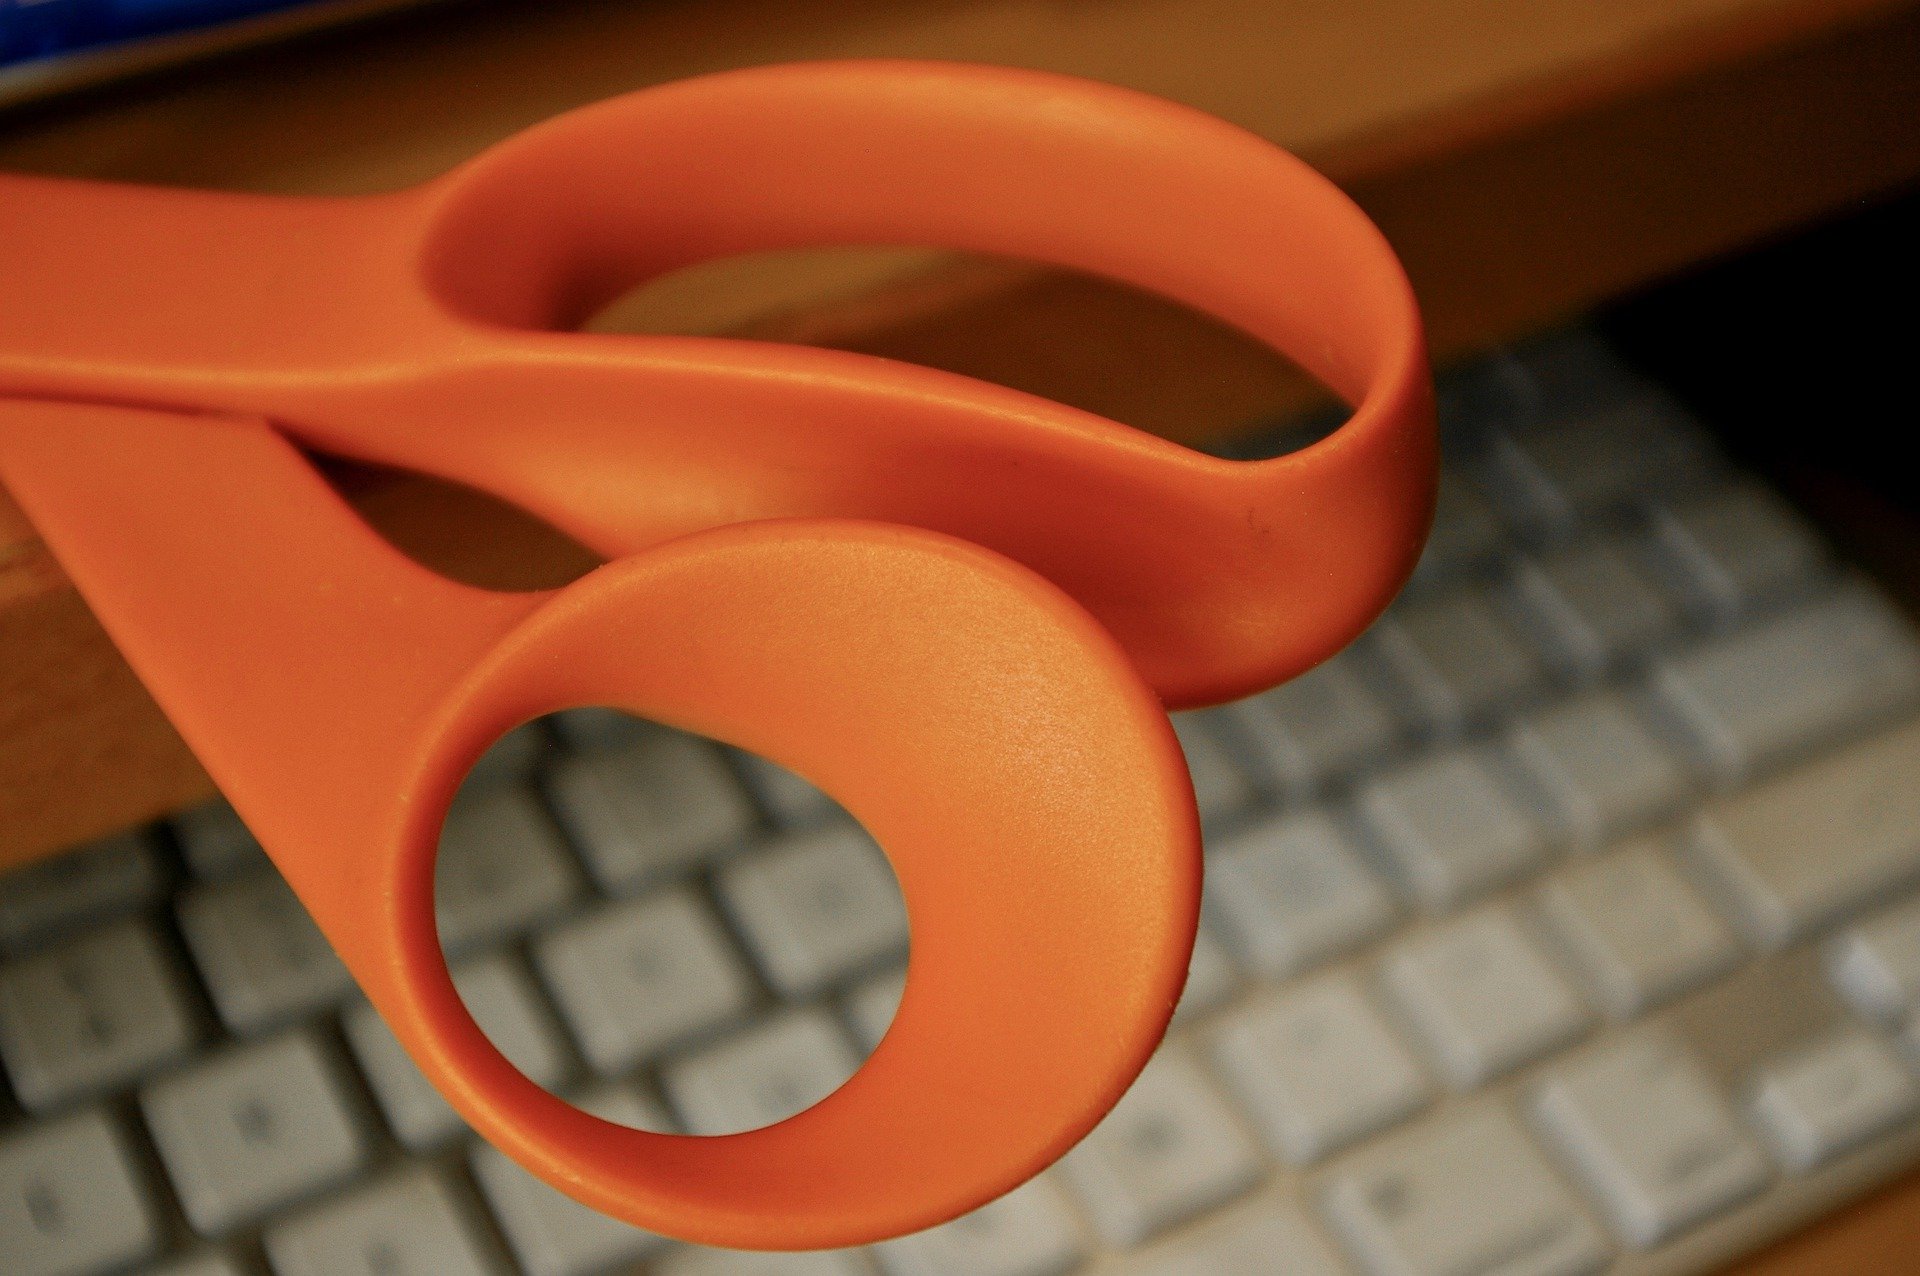 OP never found the missing pair of orange scissors. | Source: Pixabay 